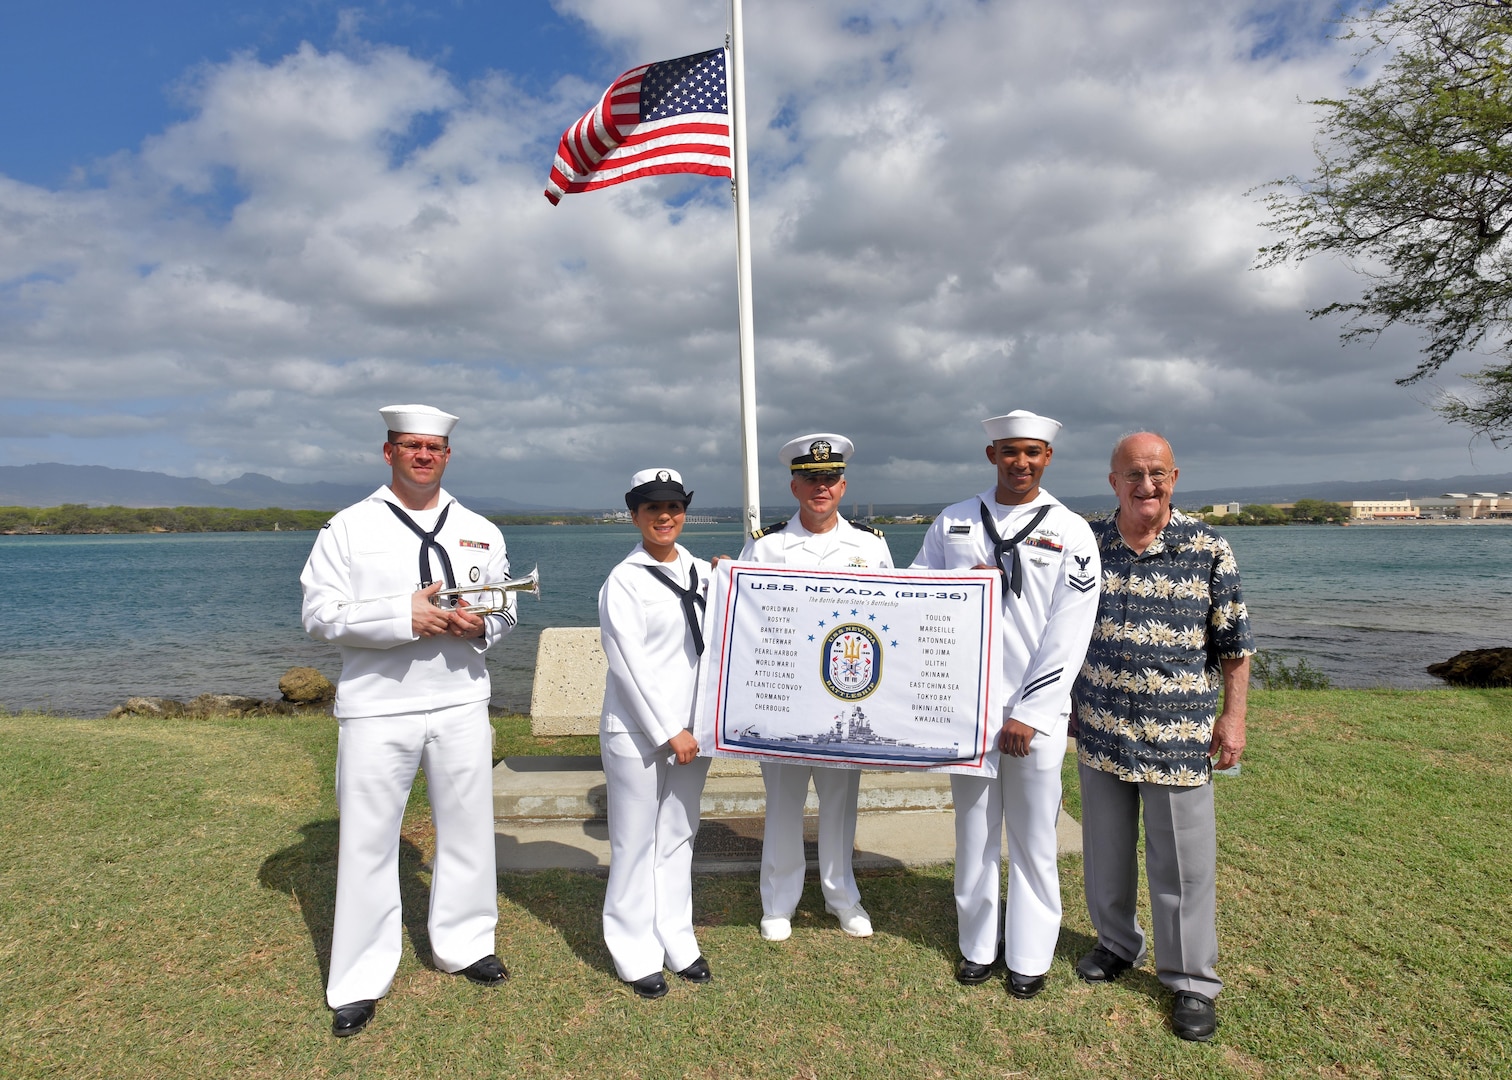 160311-N-QL961-165 PEARL HARBOR (Mar. 11, 2016) Sailors assigned to Joint Base Pearl Harbor-Hickam, and Jim Taylor, Navy Region Hawaii Pearl Harbor Survivor liaison, right, pose for a group photo with the USS Nevada (BB 36) Battleship Flag in front of the ship's memorial following its 100th anniversary of its commissioning ceremony. The ceremony was conducted at the Nevada memorial simultaneously as a similar ceremony was being held in Carson City, Nevada. (U.S. Navy photo by Mass Communication Specialist 1st Class Phillip Pavlovich/Released)